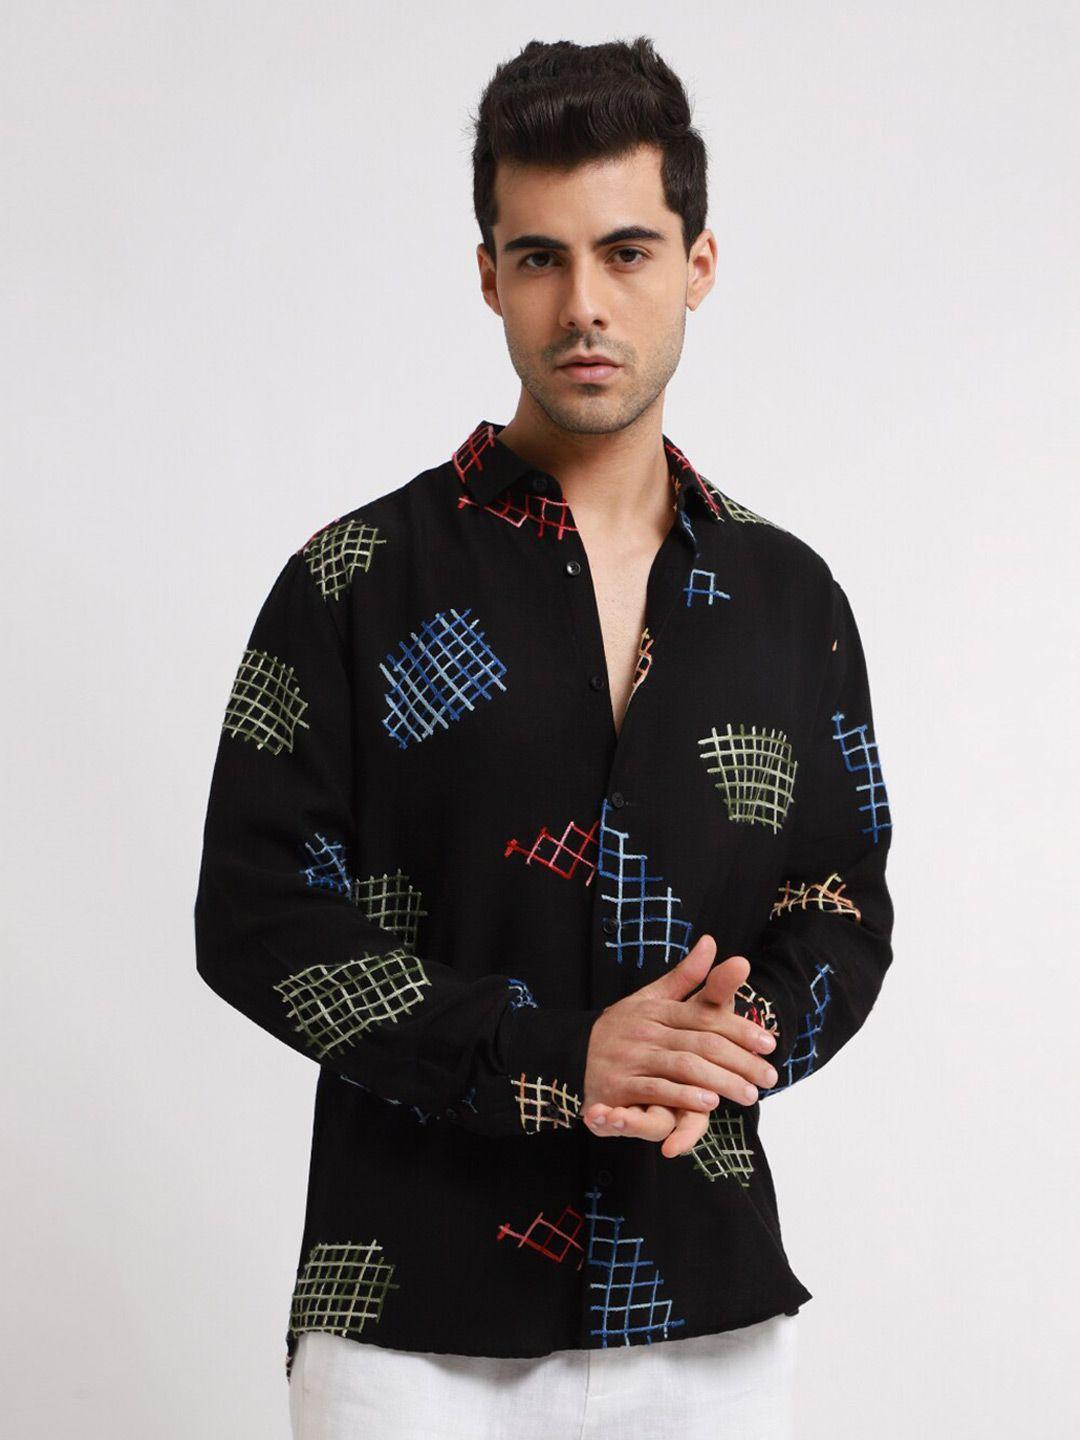 banana club relaxed slim fit floral geometric printed casual shirt